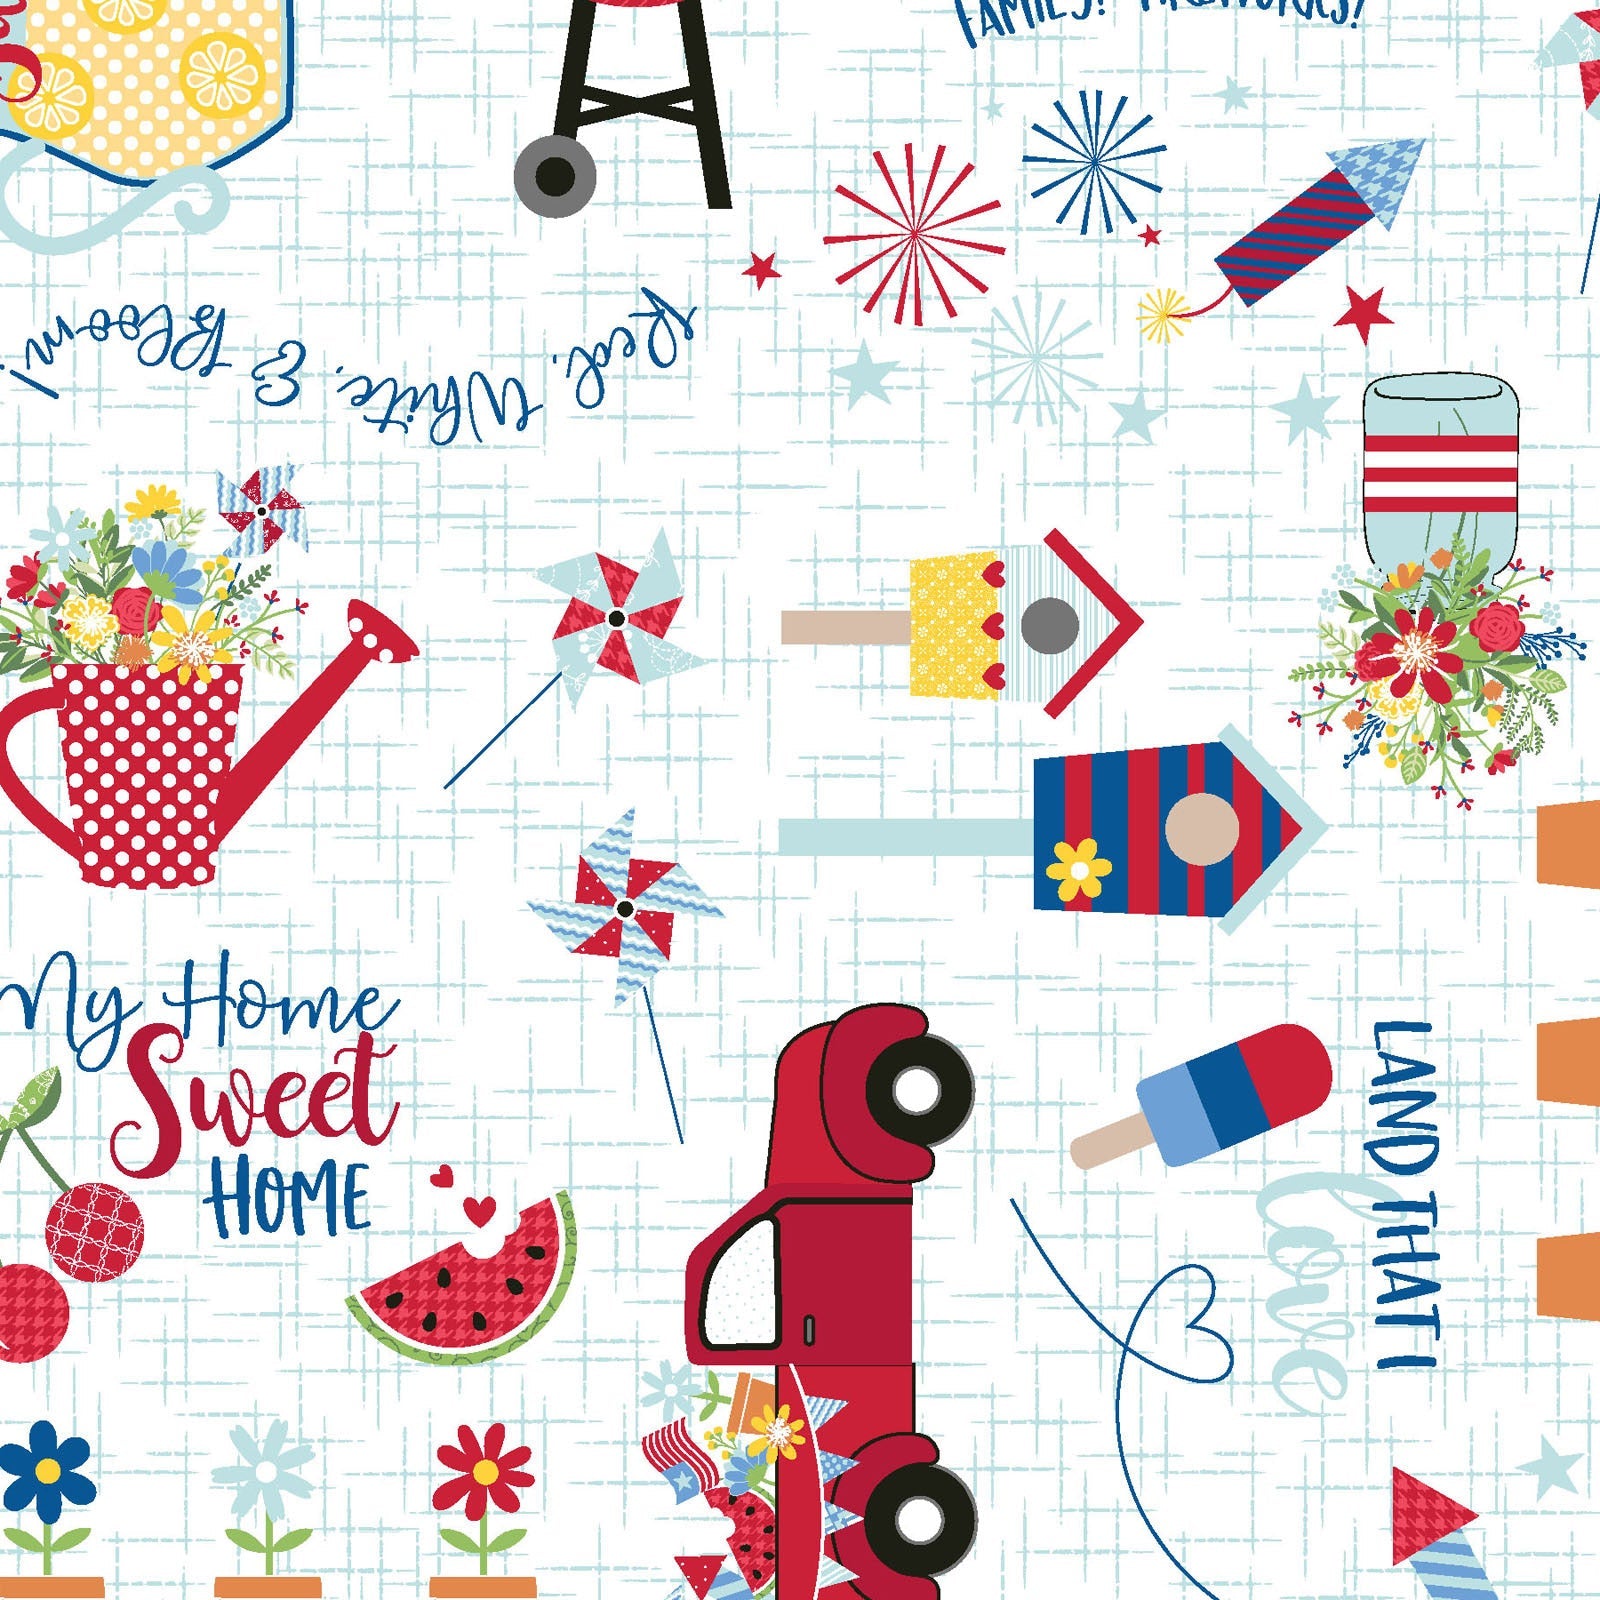 Red, White & Bloom by Kim Christopherson of Kimberbell for Maywood Studio features everything to love about summer. The feature fabric on white includes lemonade, BBQ grills, fireworks, popsicles, pinwheels and more on a background of white.